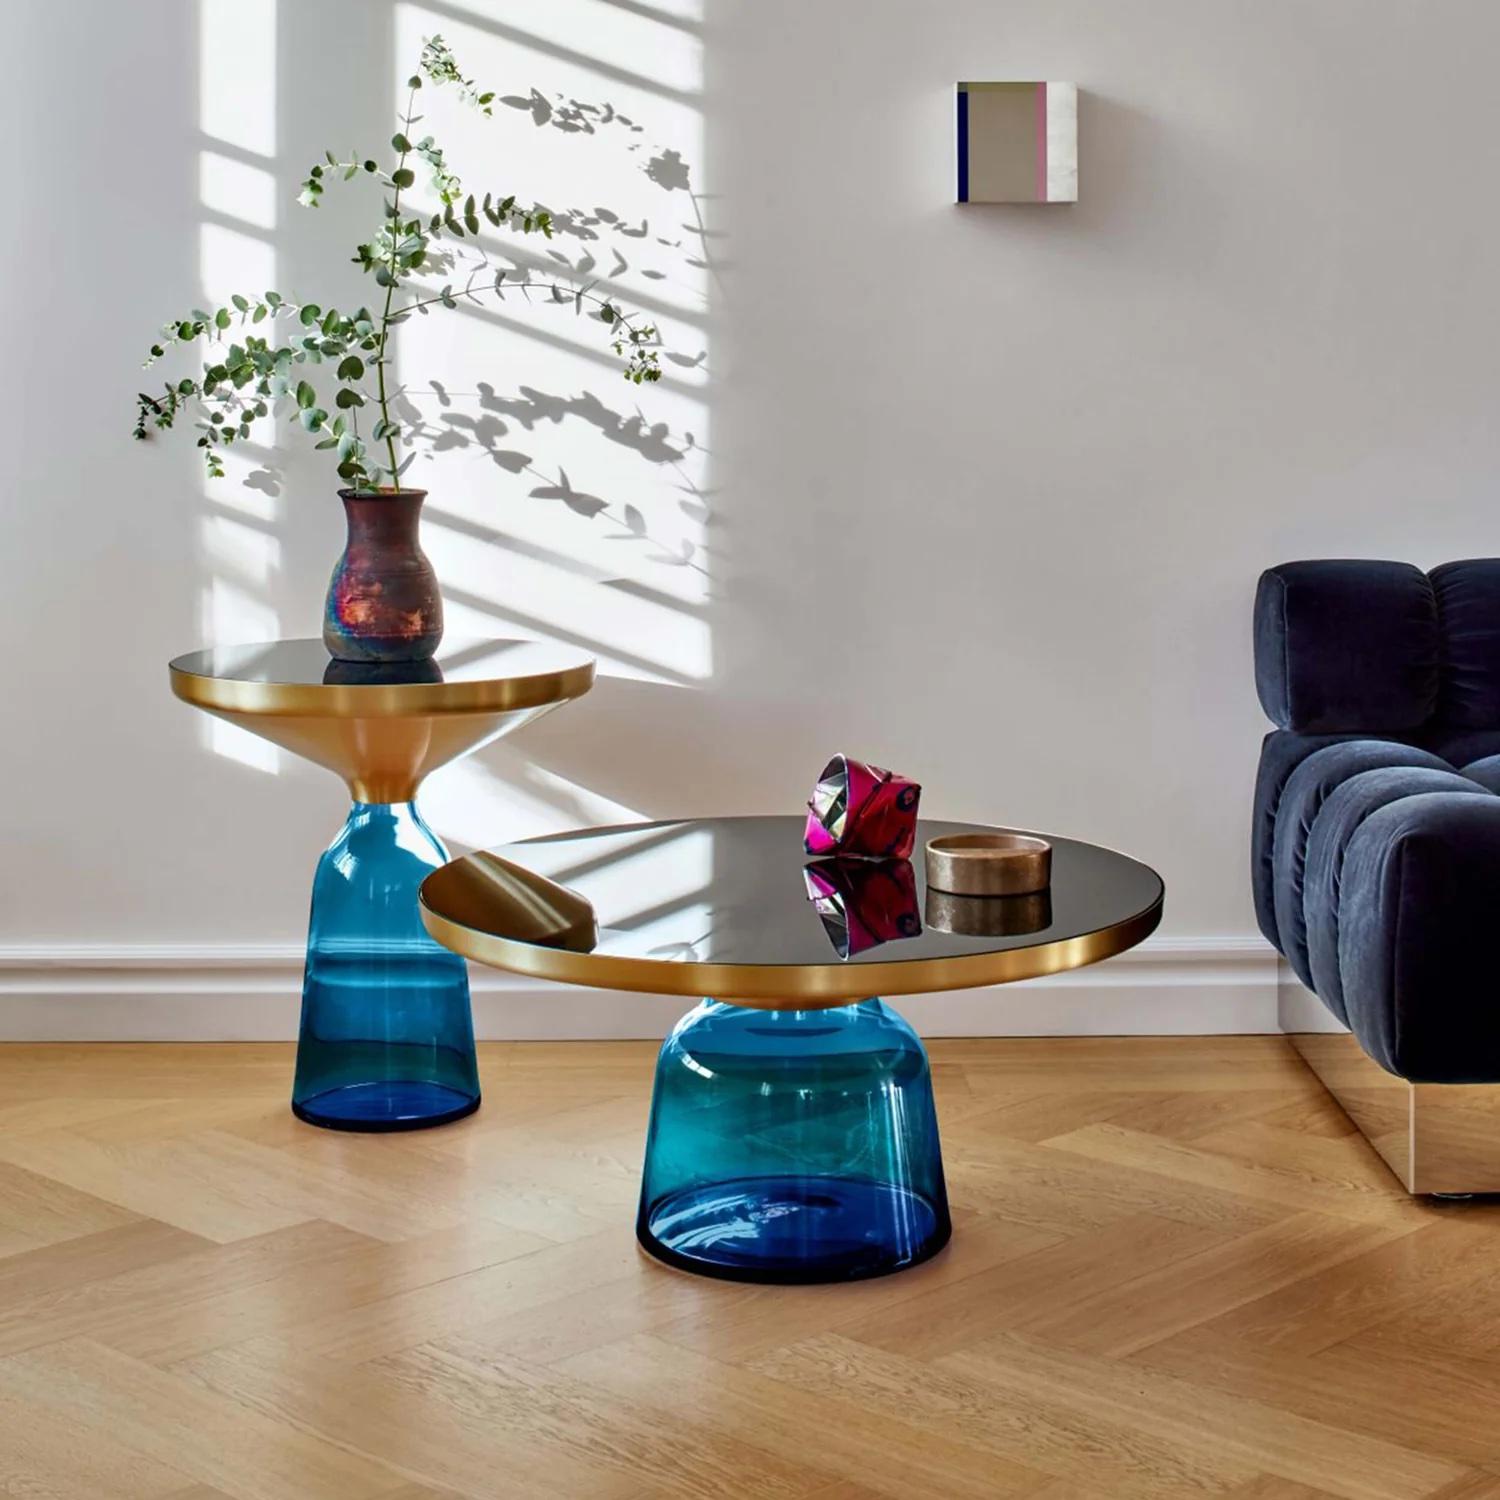 **Showroom Sample**
The bell table by Sebastian Herkner turns our perceptual habits on their head, using the lightweight, fragile material of glass as base for a metal top that seems to float above it. Hand blown in the traditional manner using a